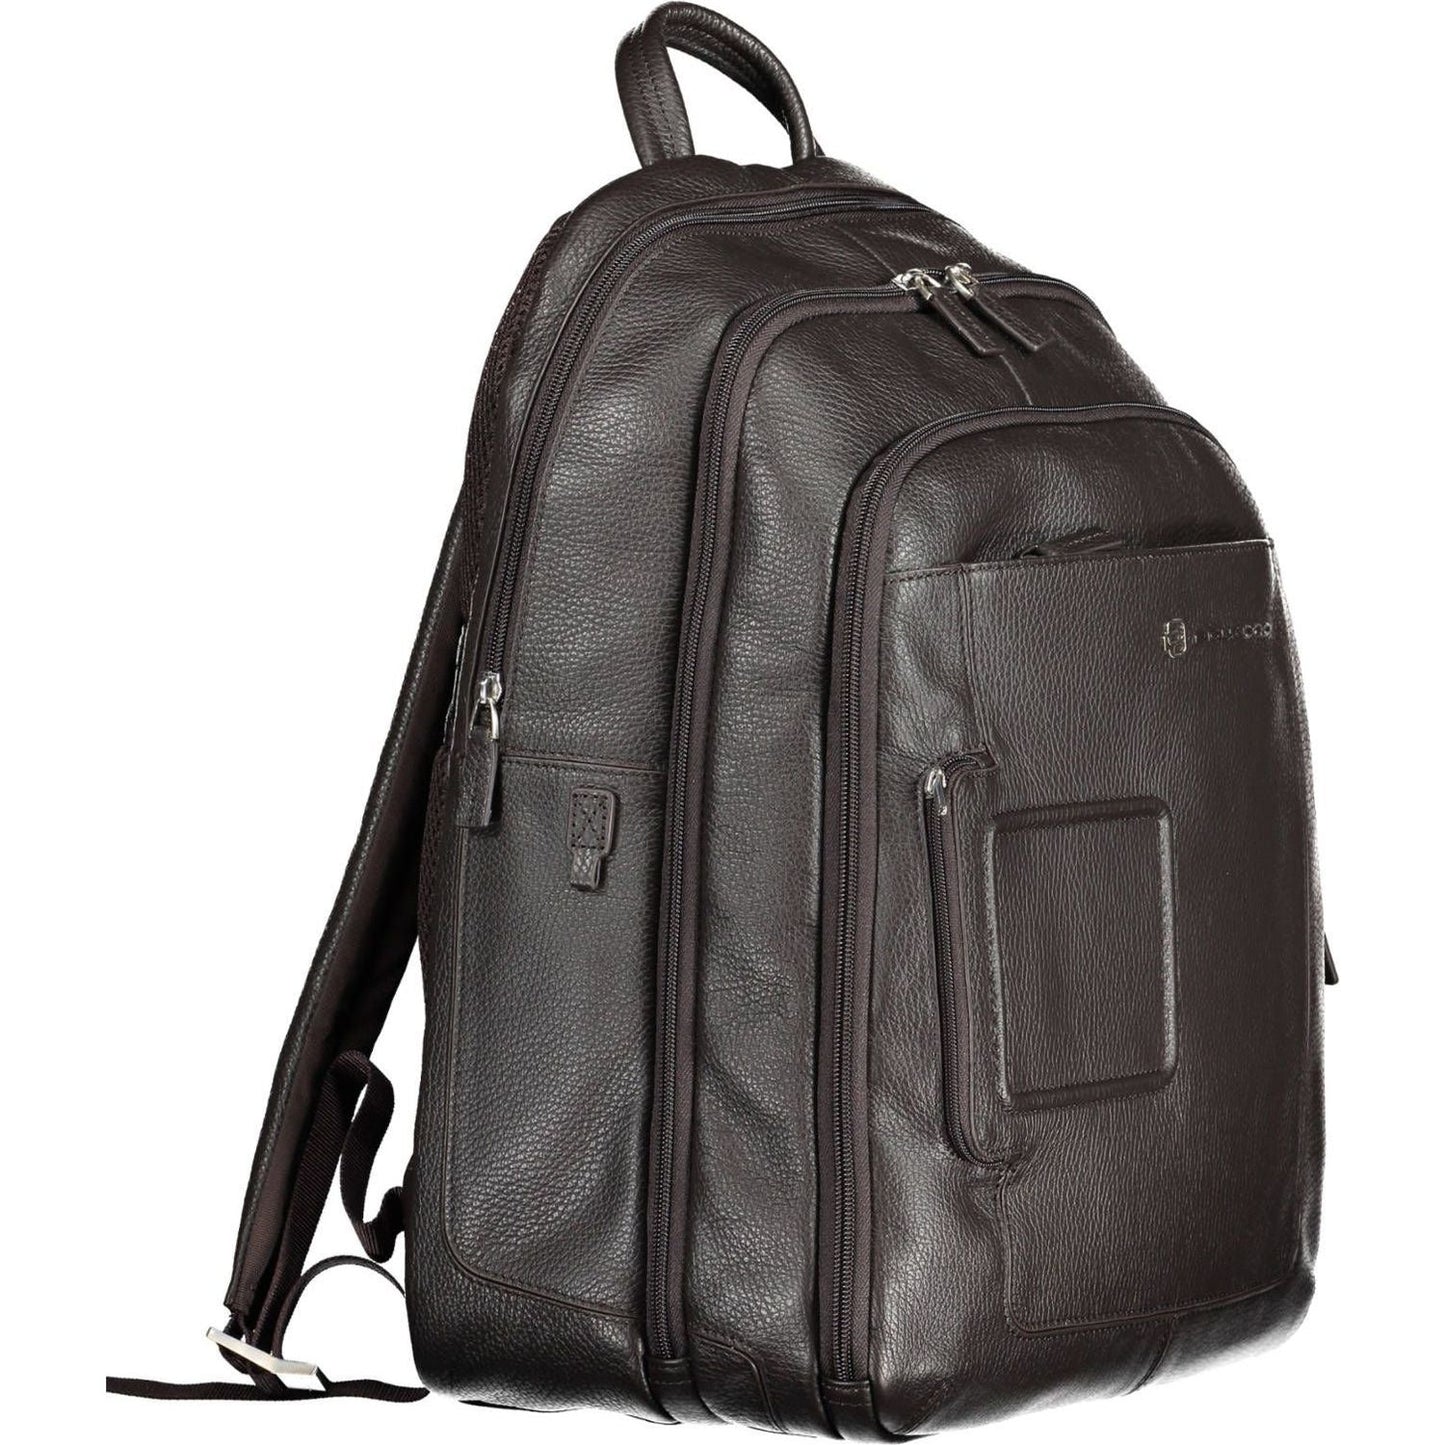 Piquadro Elegant Leather Backpack with Laptop Compartment elegant-leather-backpack-with-laptop-compartment